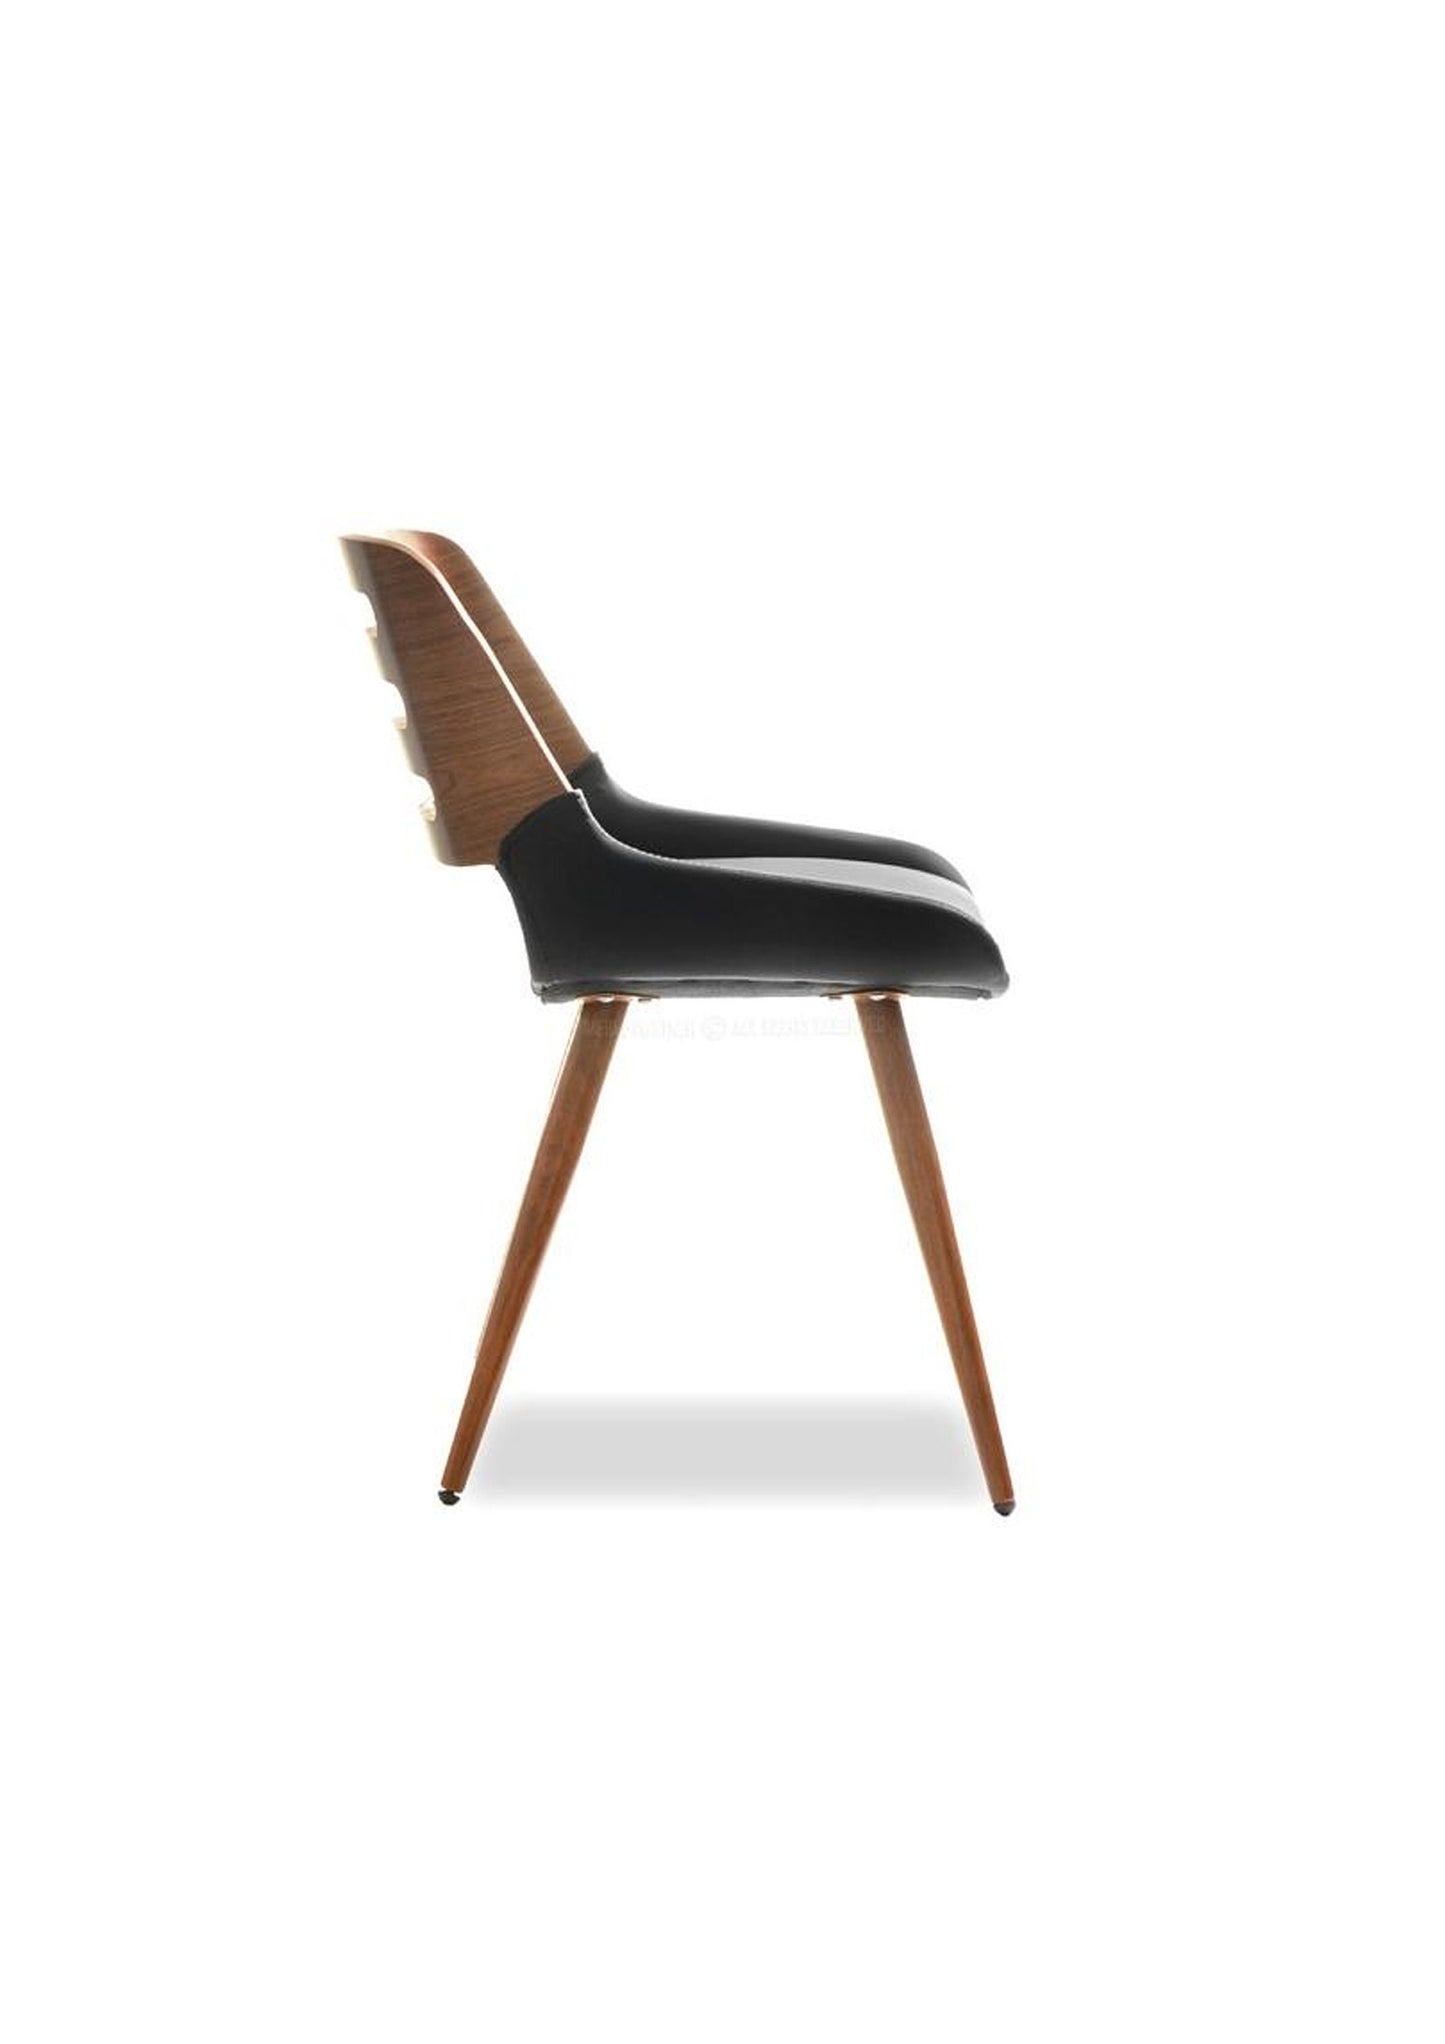 Designer chair Retro Chair Scandi Office Desk or Dining Chair in Faux Leather and Walnut Pre Order for mid February